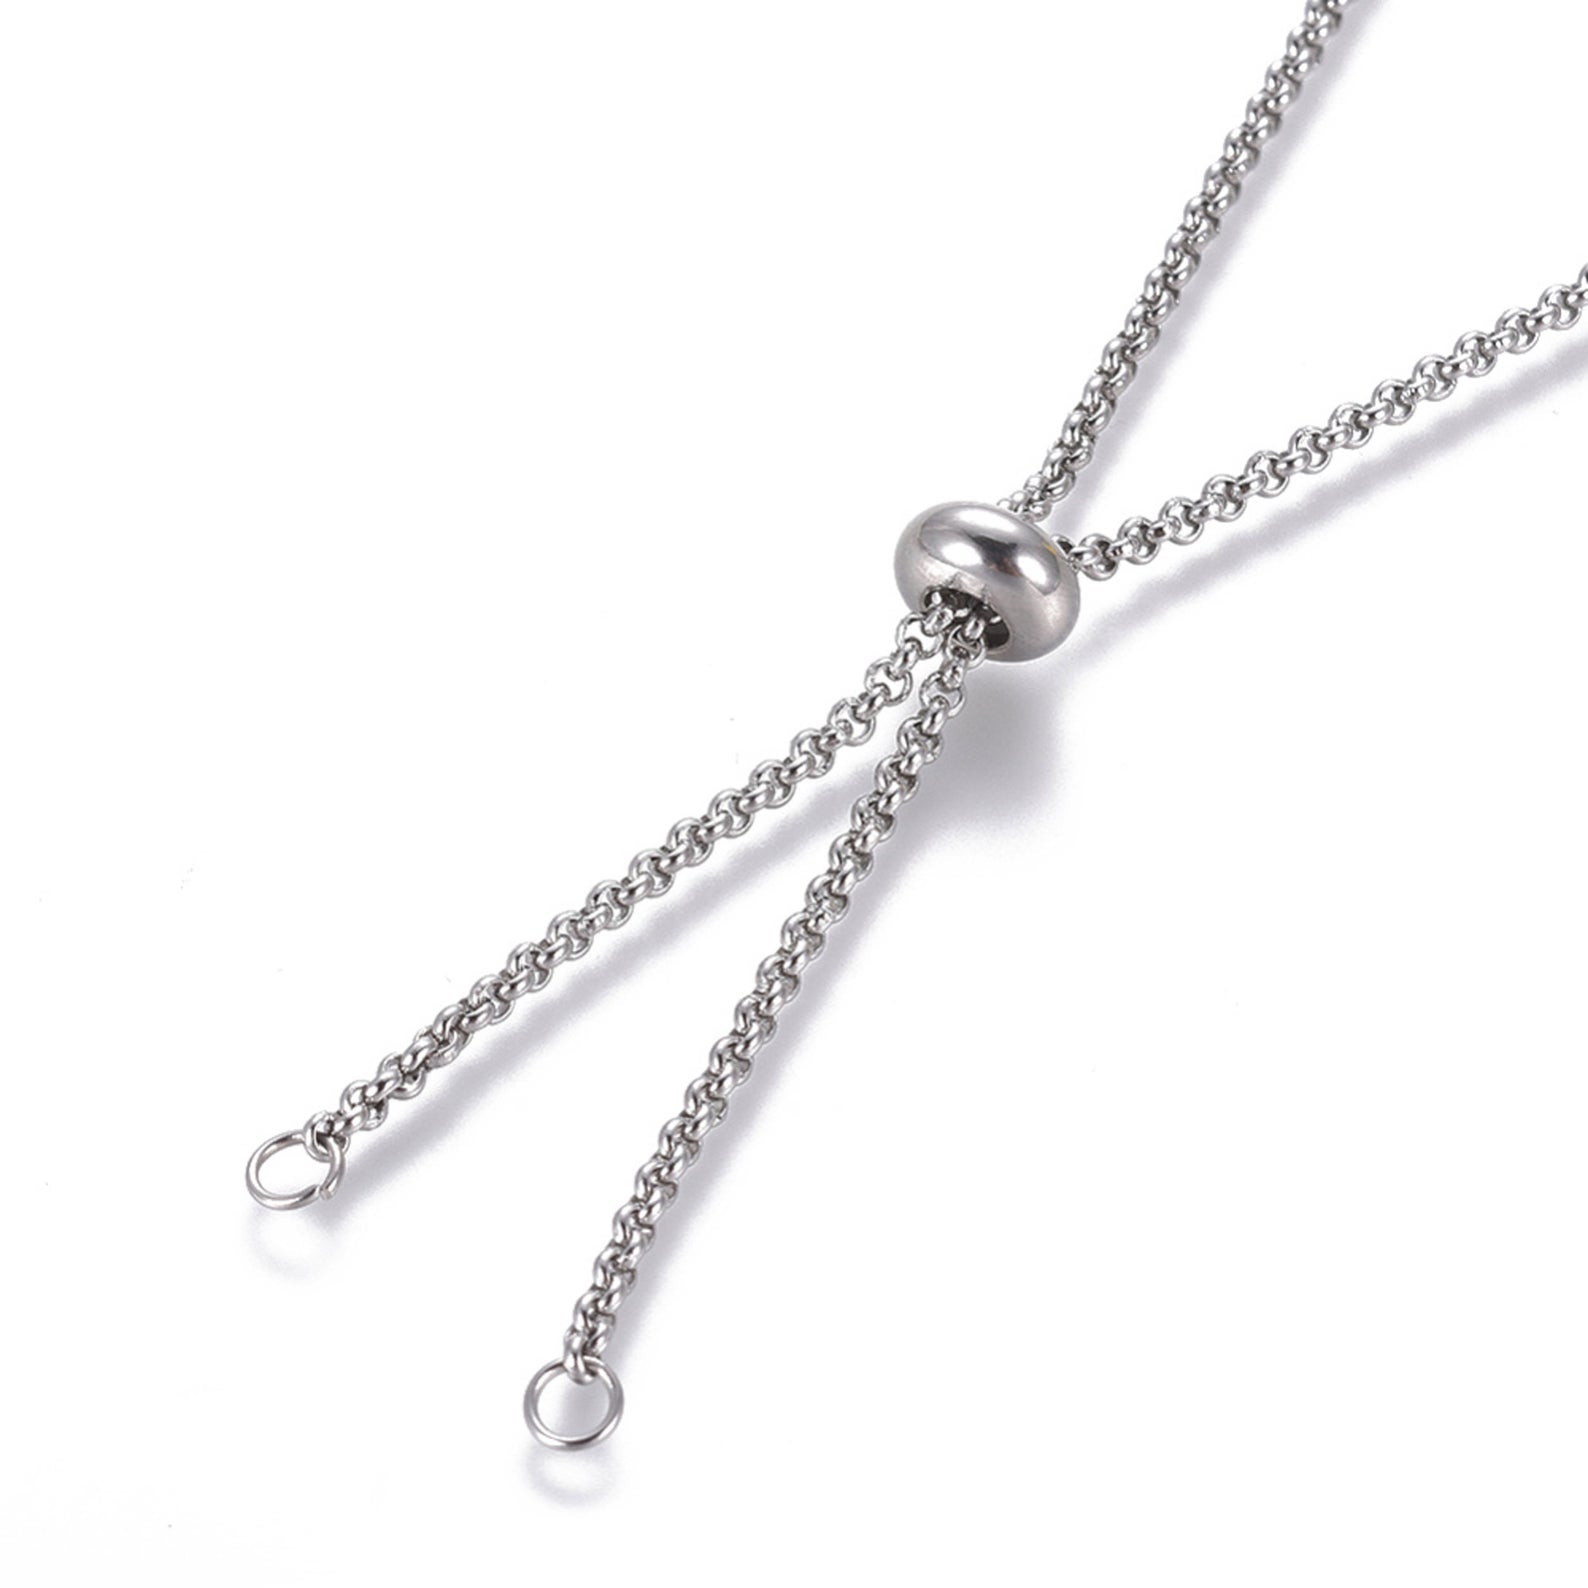 LiQunSweet 304 Stainless Steel Metal Slider Adjustable Necklaces with Rolo  Chains & Stopper Beads for Pendant Charm Necklace DIY Handmade Craft